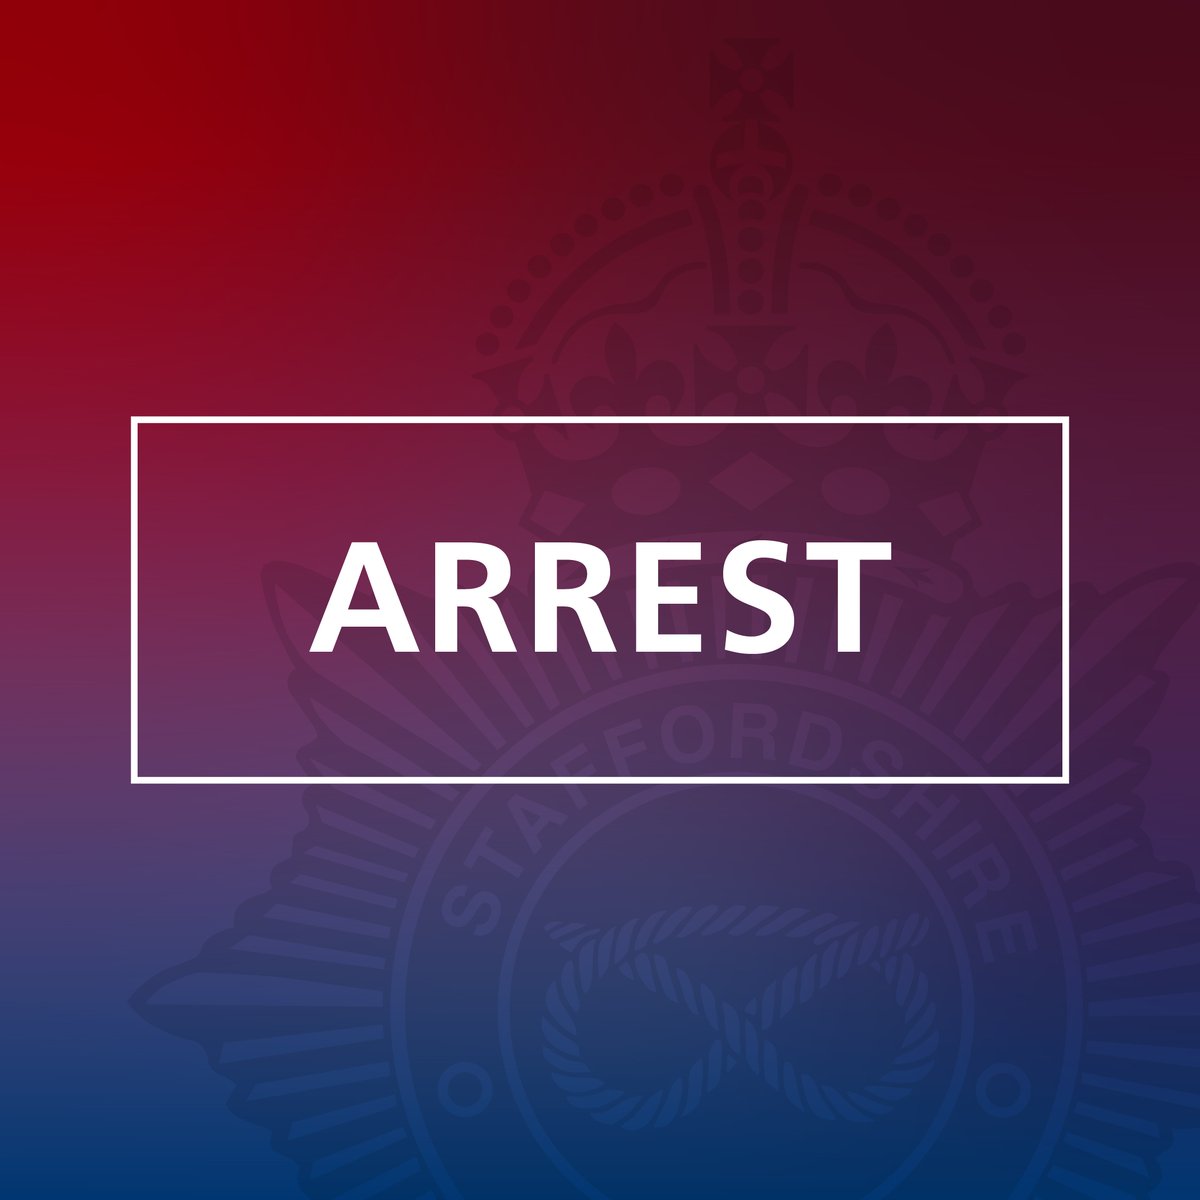 A man has been arrested after we seized a knuckleduster, drugs, cash and a mobile phone in Tamworth. Read more, here: orlo.uk/CyG3I